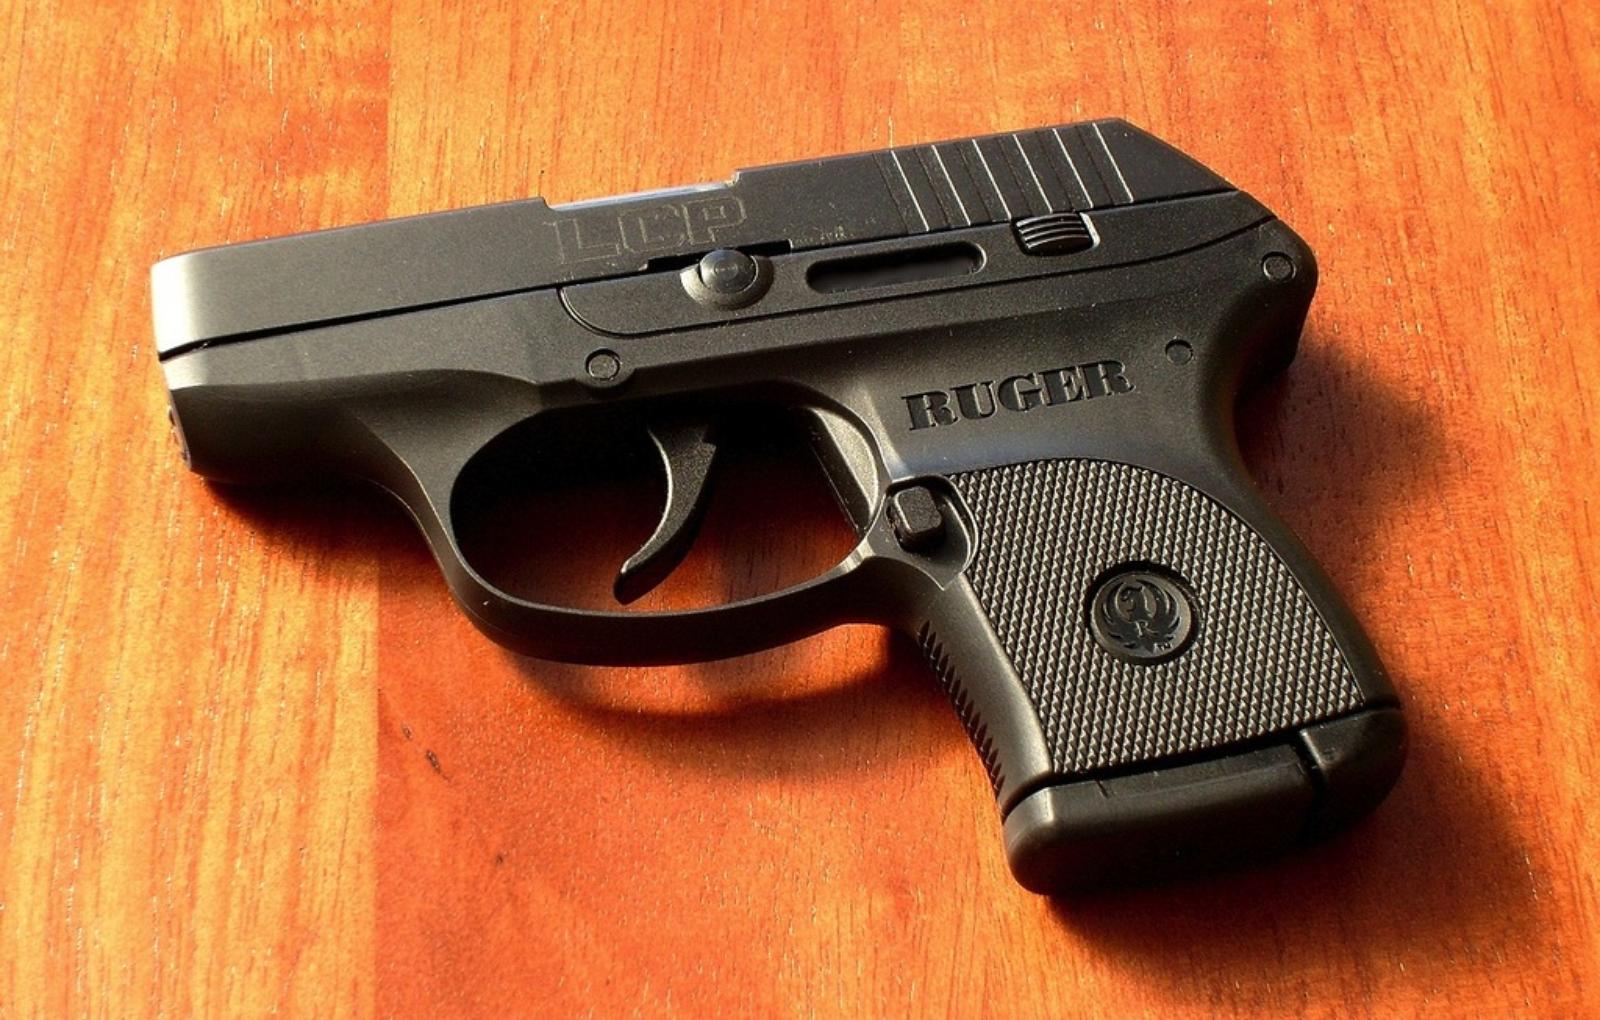 A Ruger LCP .380 handgun, one of the more popular weapons found by the TSA. 